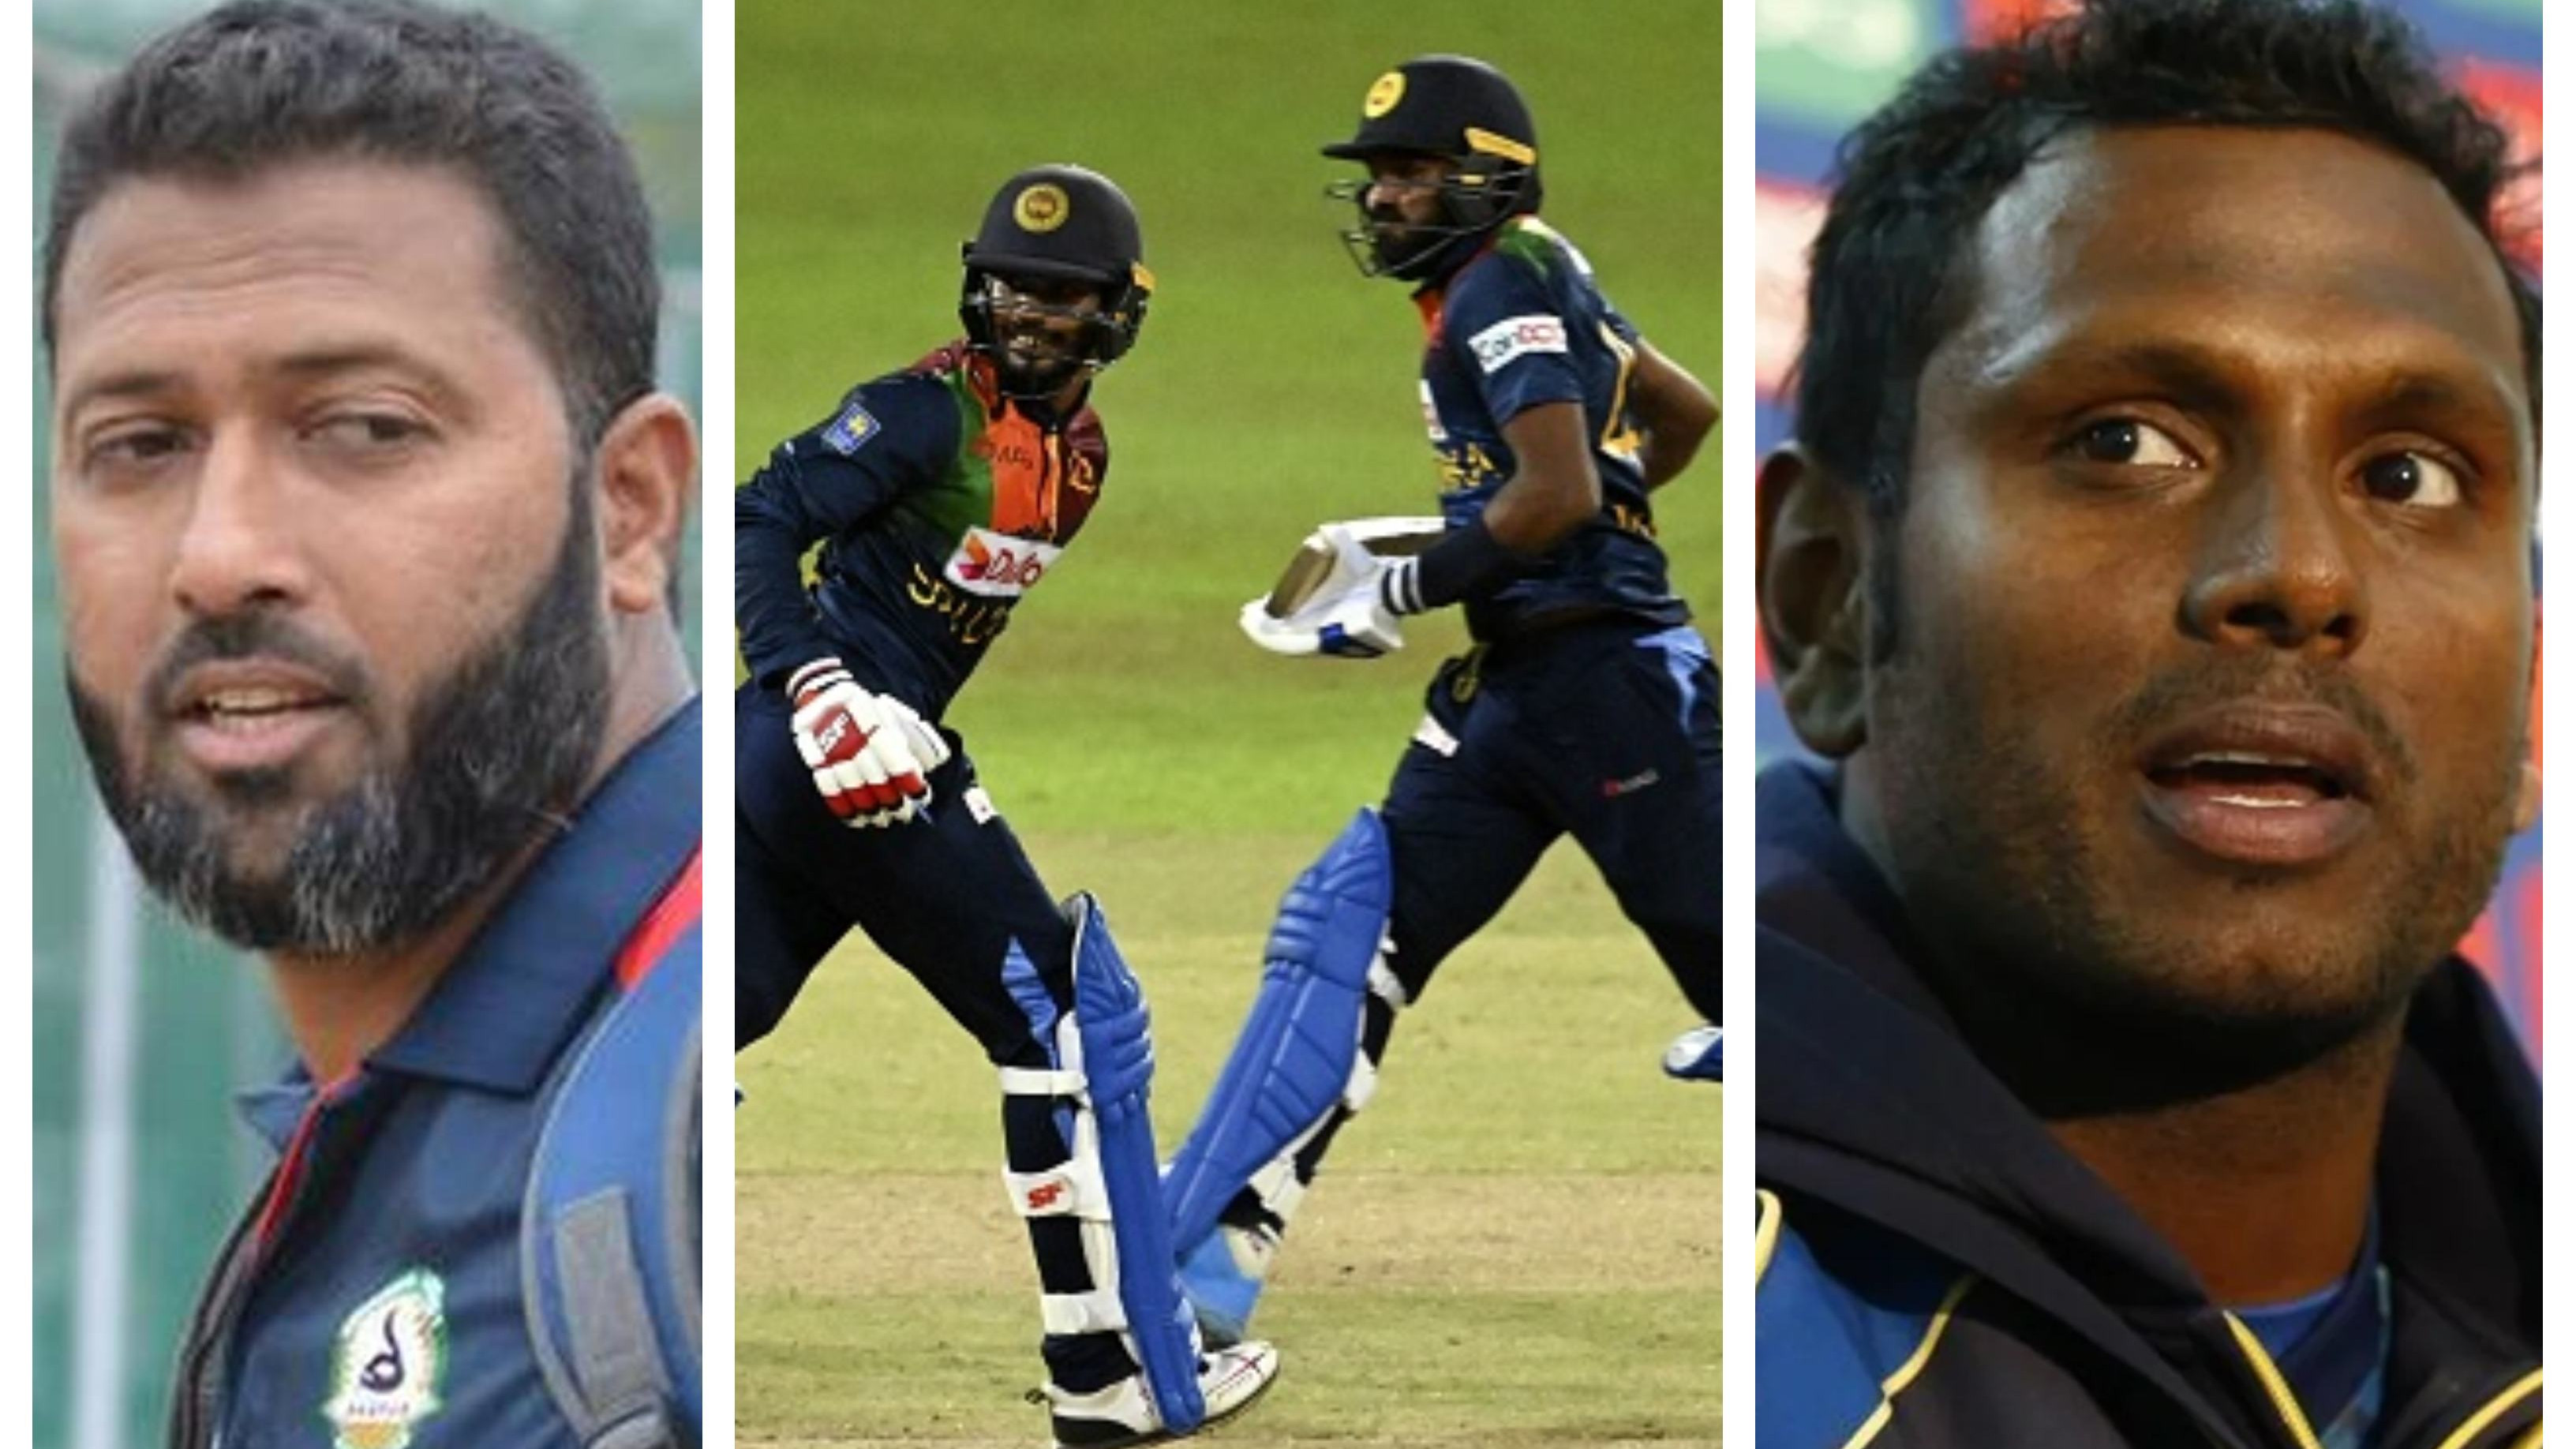 SL v IND 2021: Cricket fraternity reacts to Sri Lanka’s series-clinching 7-wicket victory in third T20I